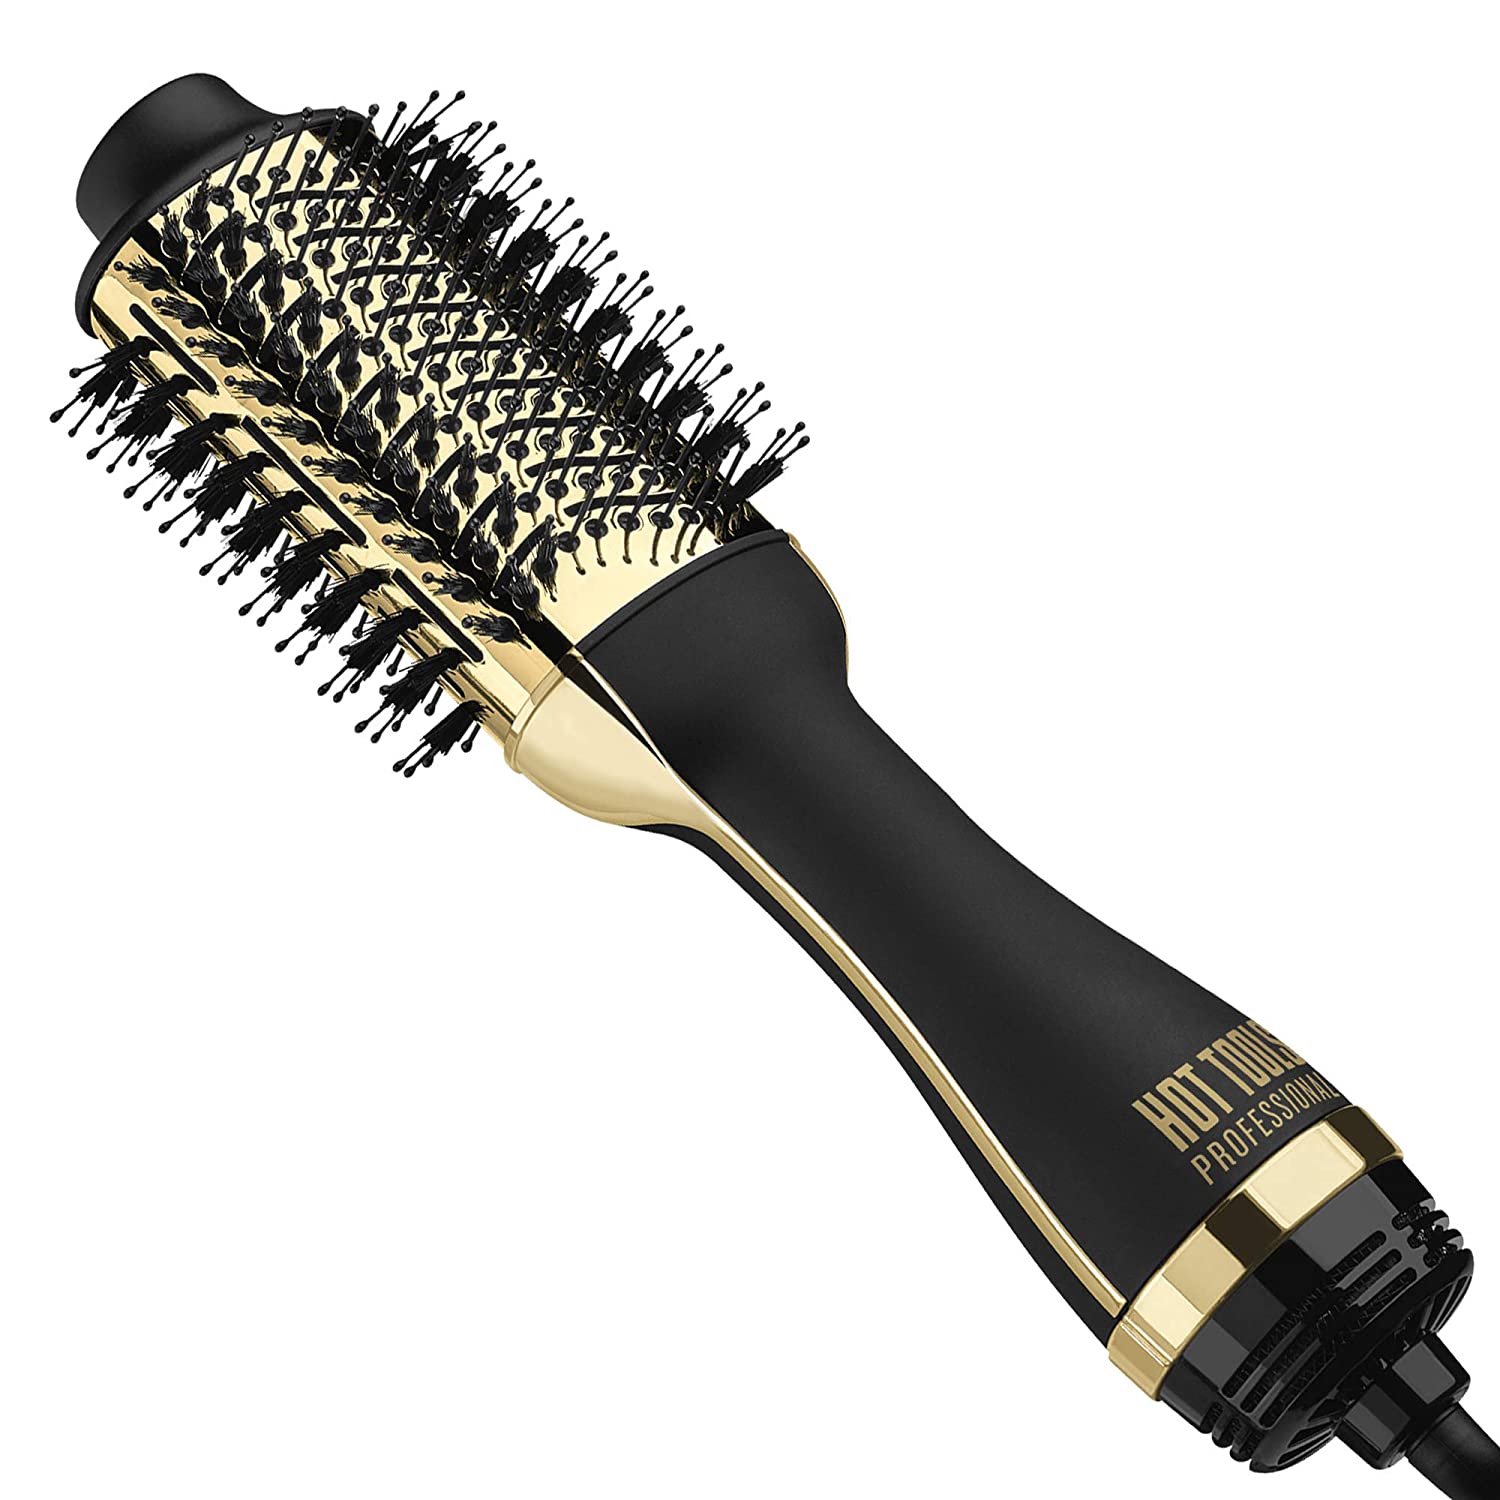 Amazon Prime Members: Hot Tools Professional 24K Gold One Step Hair Dryer Volumizer $29.45 + Free Shipping